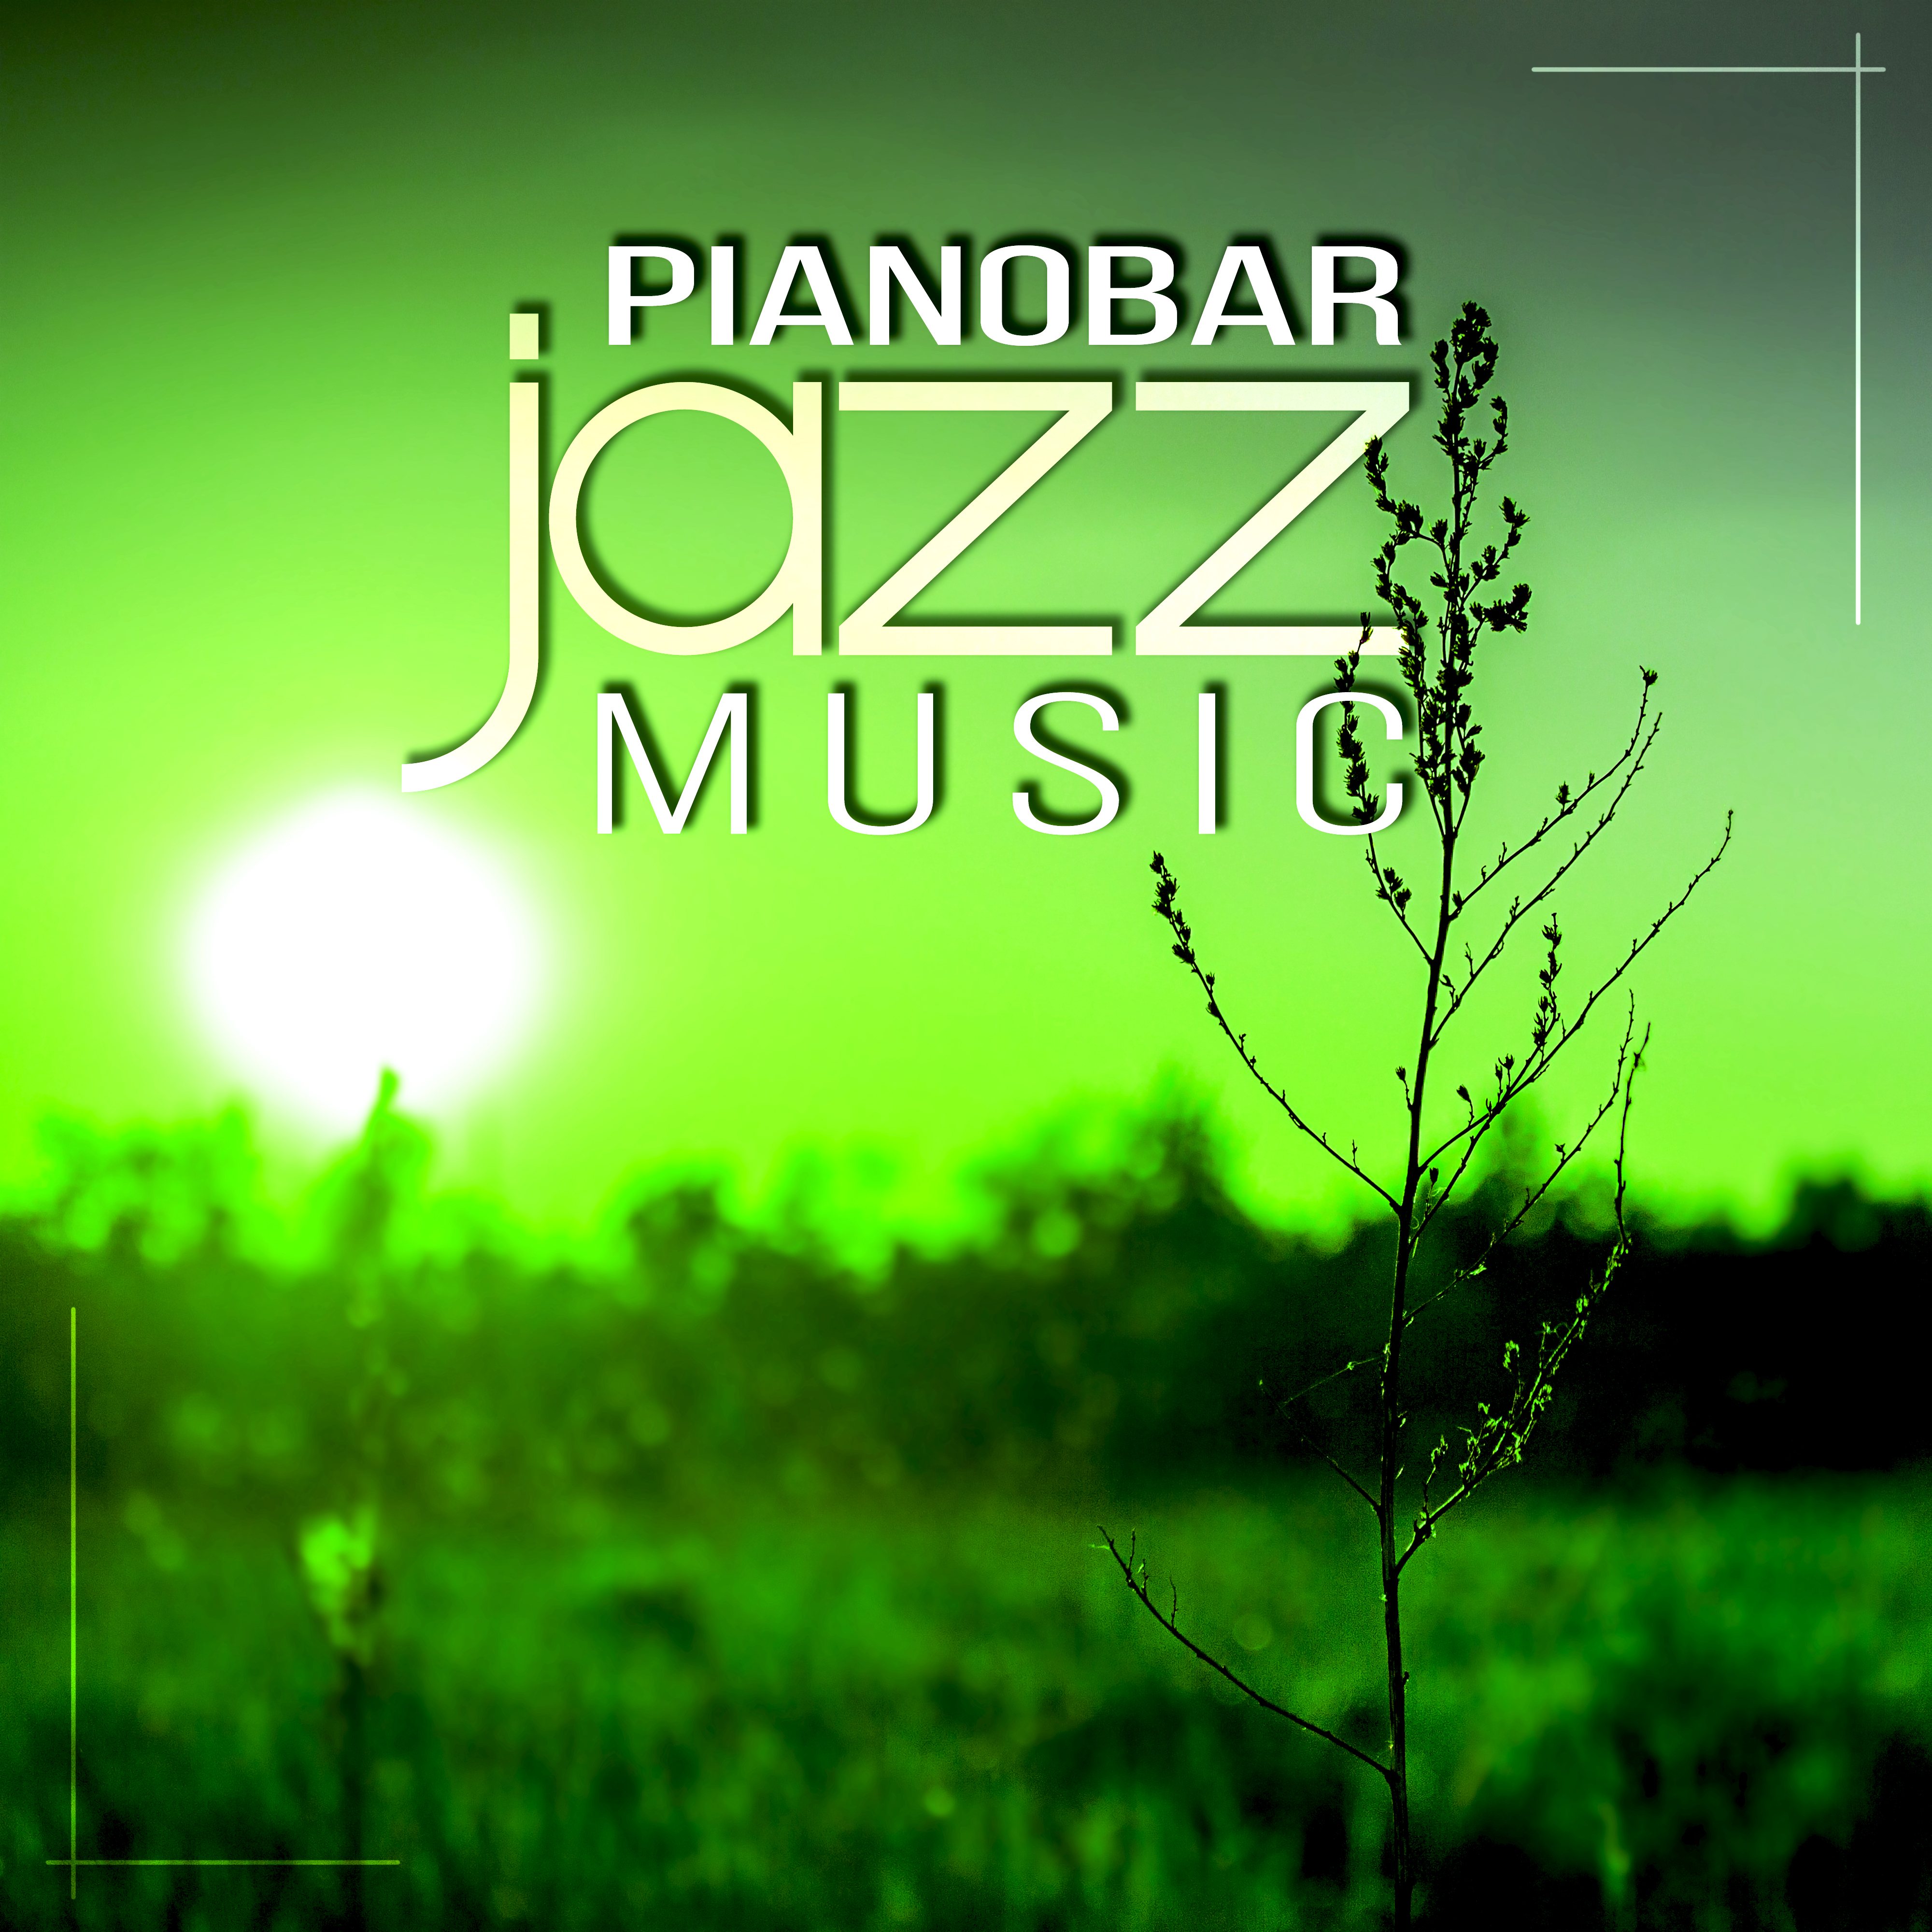 Pianobar Jazz Music  Easy Listening Cafe Bar Collection, Smooth  Soothing Restaurant Background Music, Romantic Dinner Party